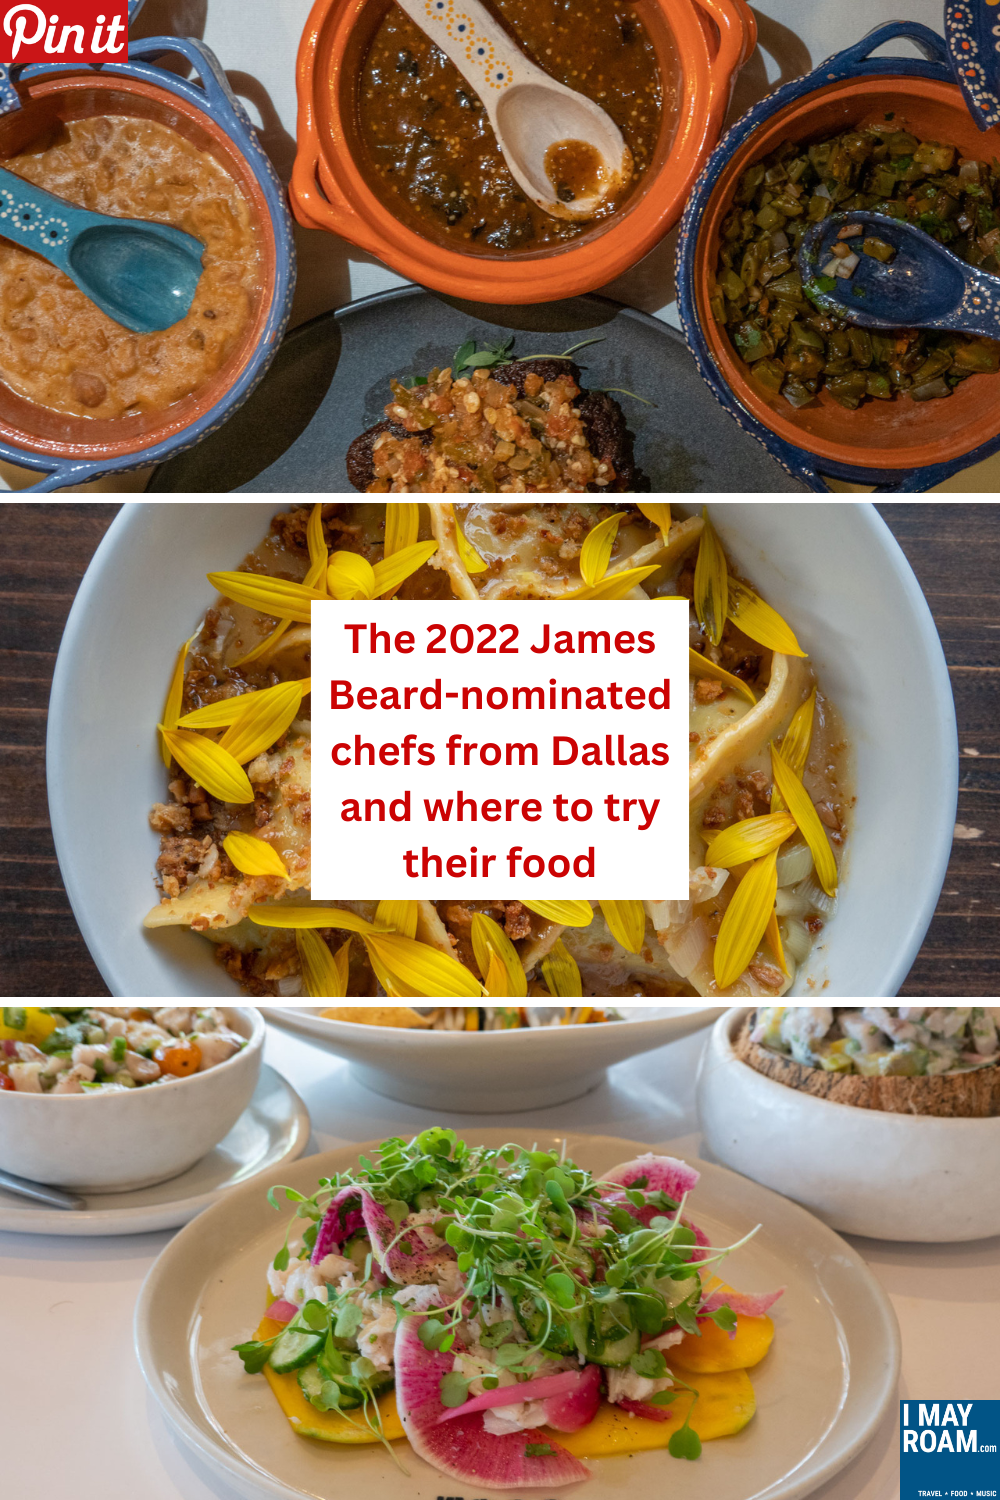 Pinterest The 2022 James Beard-nominated chefs from Dallas and where to try their food